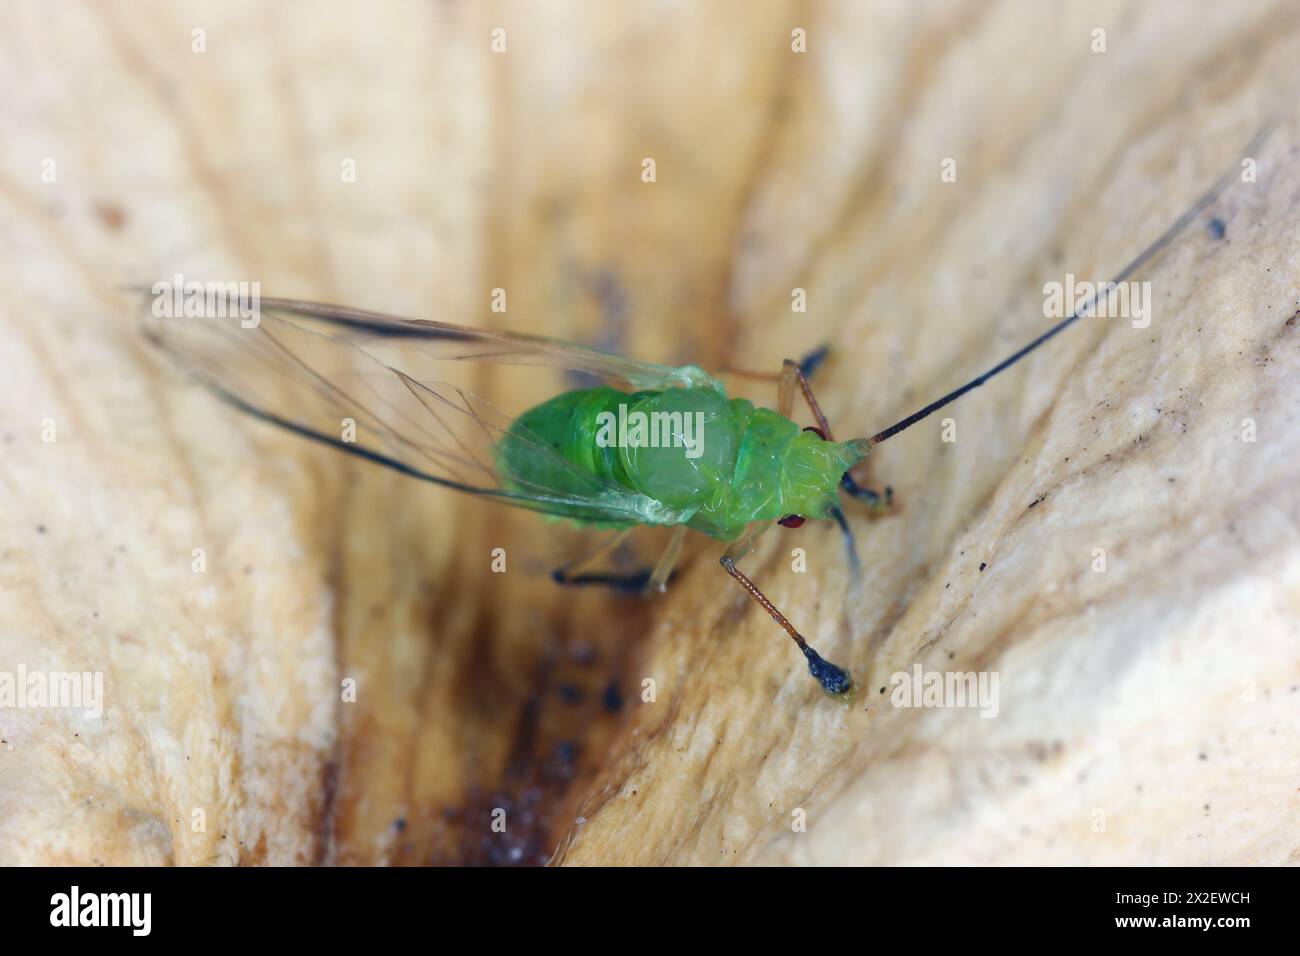 High magnification, macro photo of a beautiful green aphid. Stock Photo